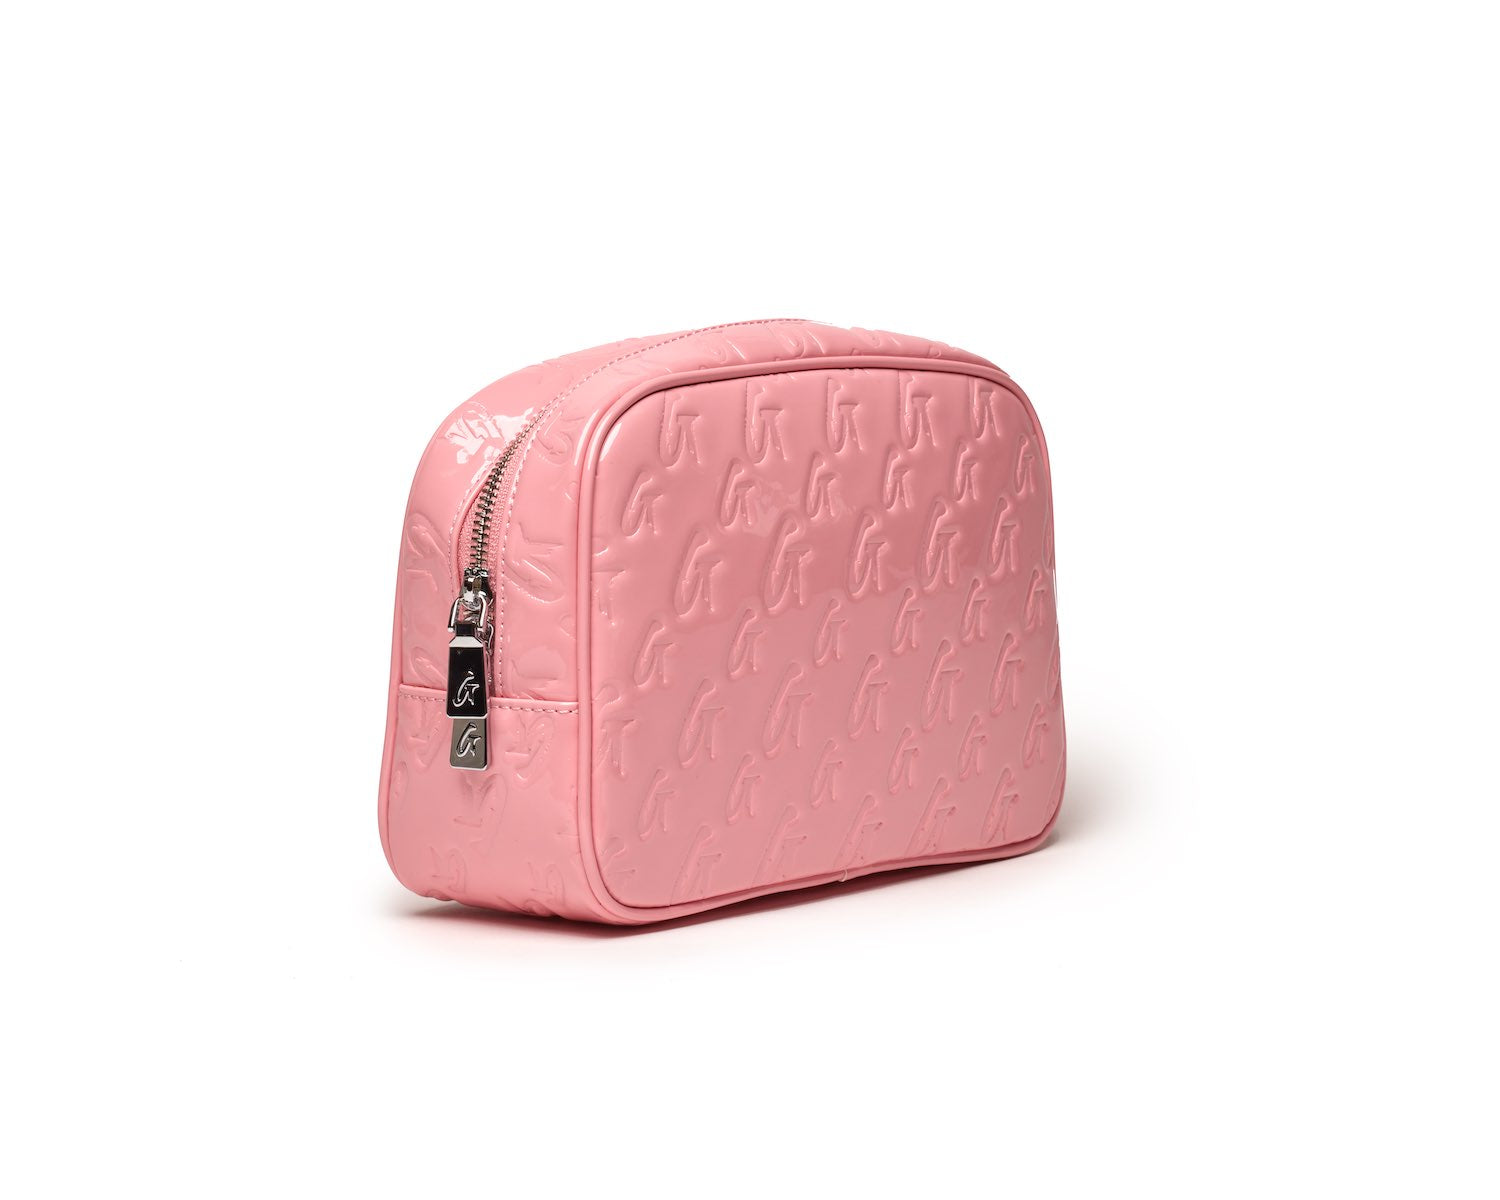 MONOGRAM SMALL COSMETIC TOILETRY BAG MIRROR PINK – Glam-Aholic Lifestyle